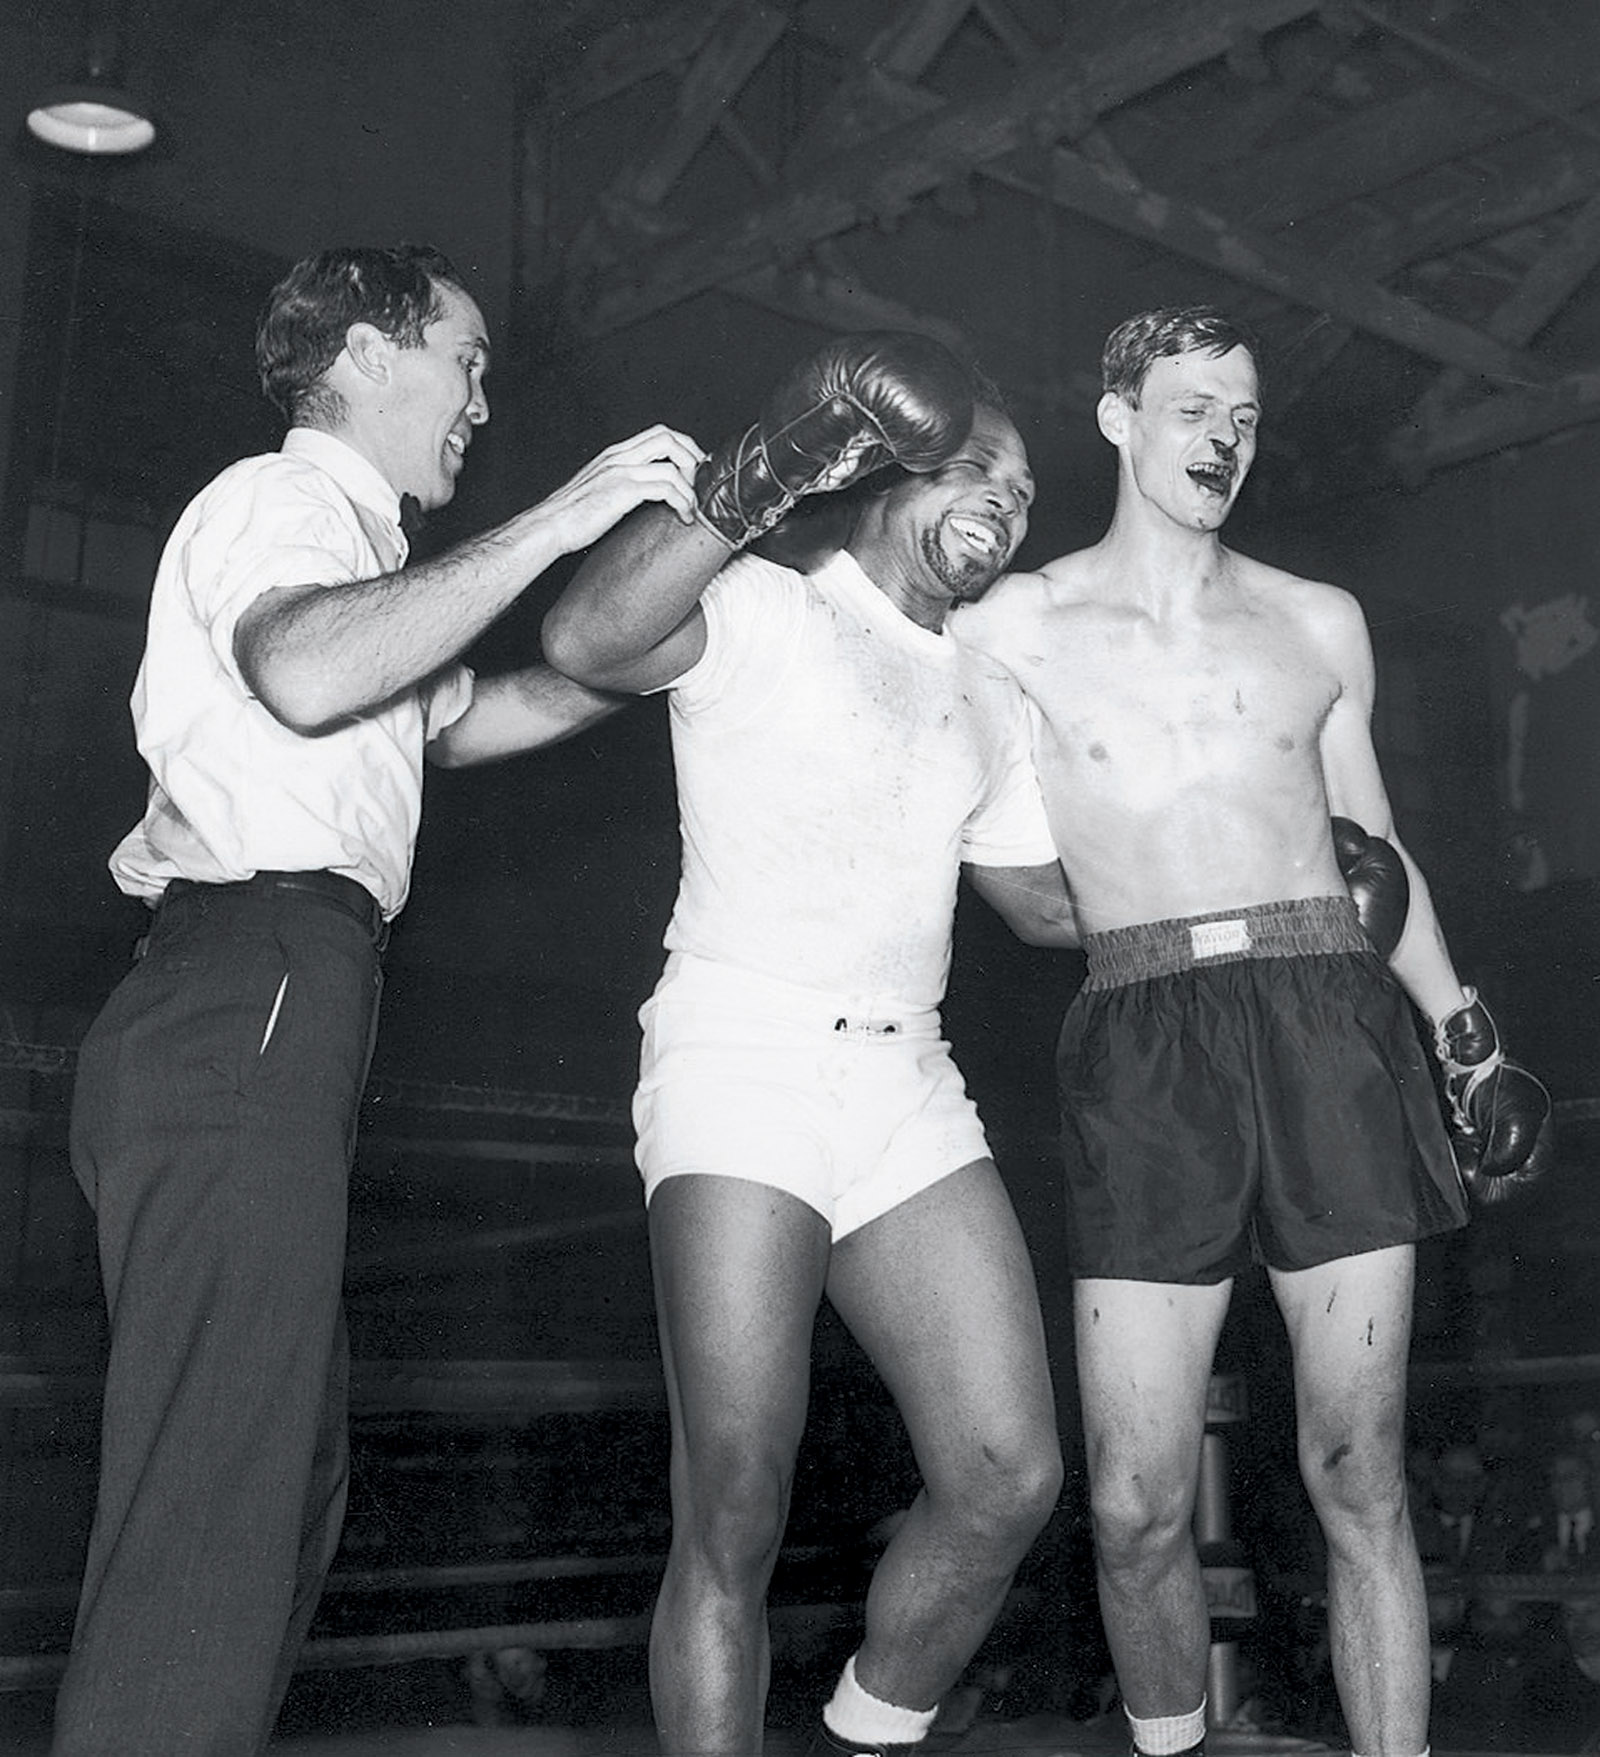 George Plimpton, right, after a boxing match with Archie Moore at Stillman’s Gym, New York City, 1959; Ezra Bowen, the Sports Illustrated editor who acted as referee, is at left. ‘Quite visible are the effects Archie Moore left on the author’s nose,’ Plimpton writes in Shadow Box, ‘what would have been described in the jaunty style of the mid-nineteenth century as follows: “Archie dropped a hut’un on George’s sneezer which shook his ivories and turned the tap on.”’